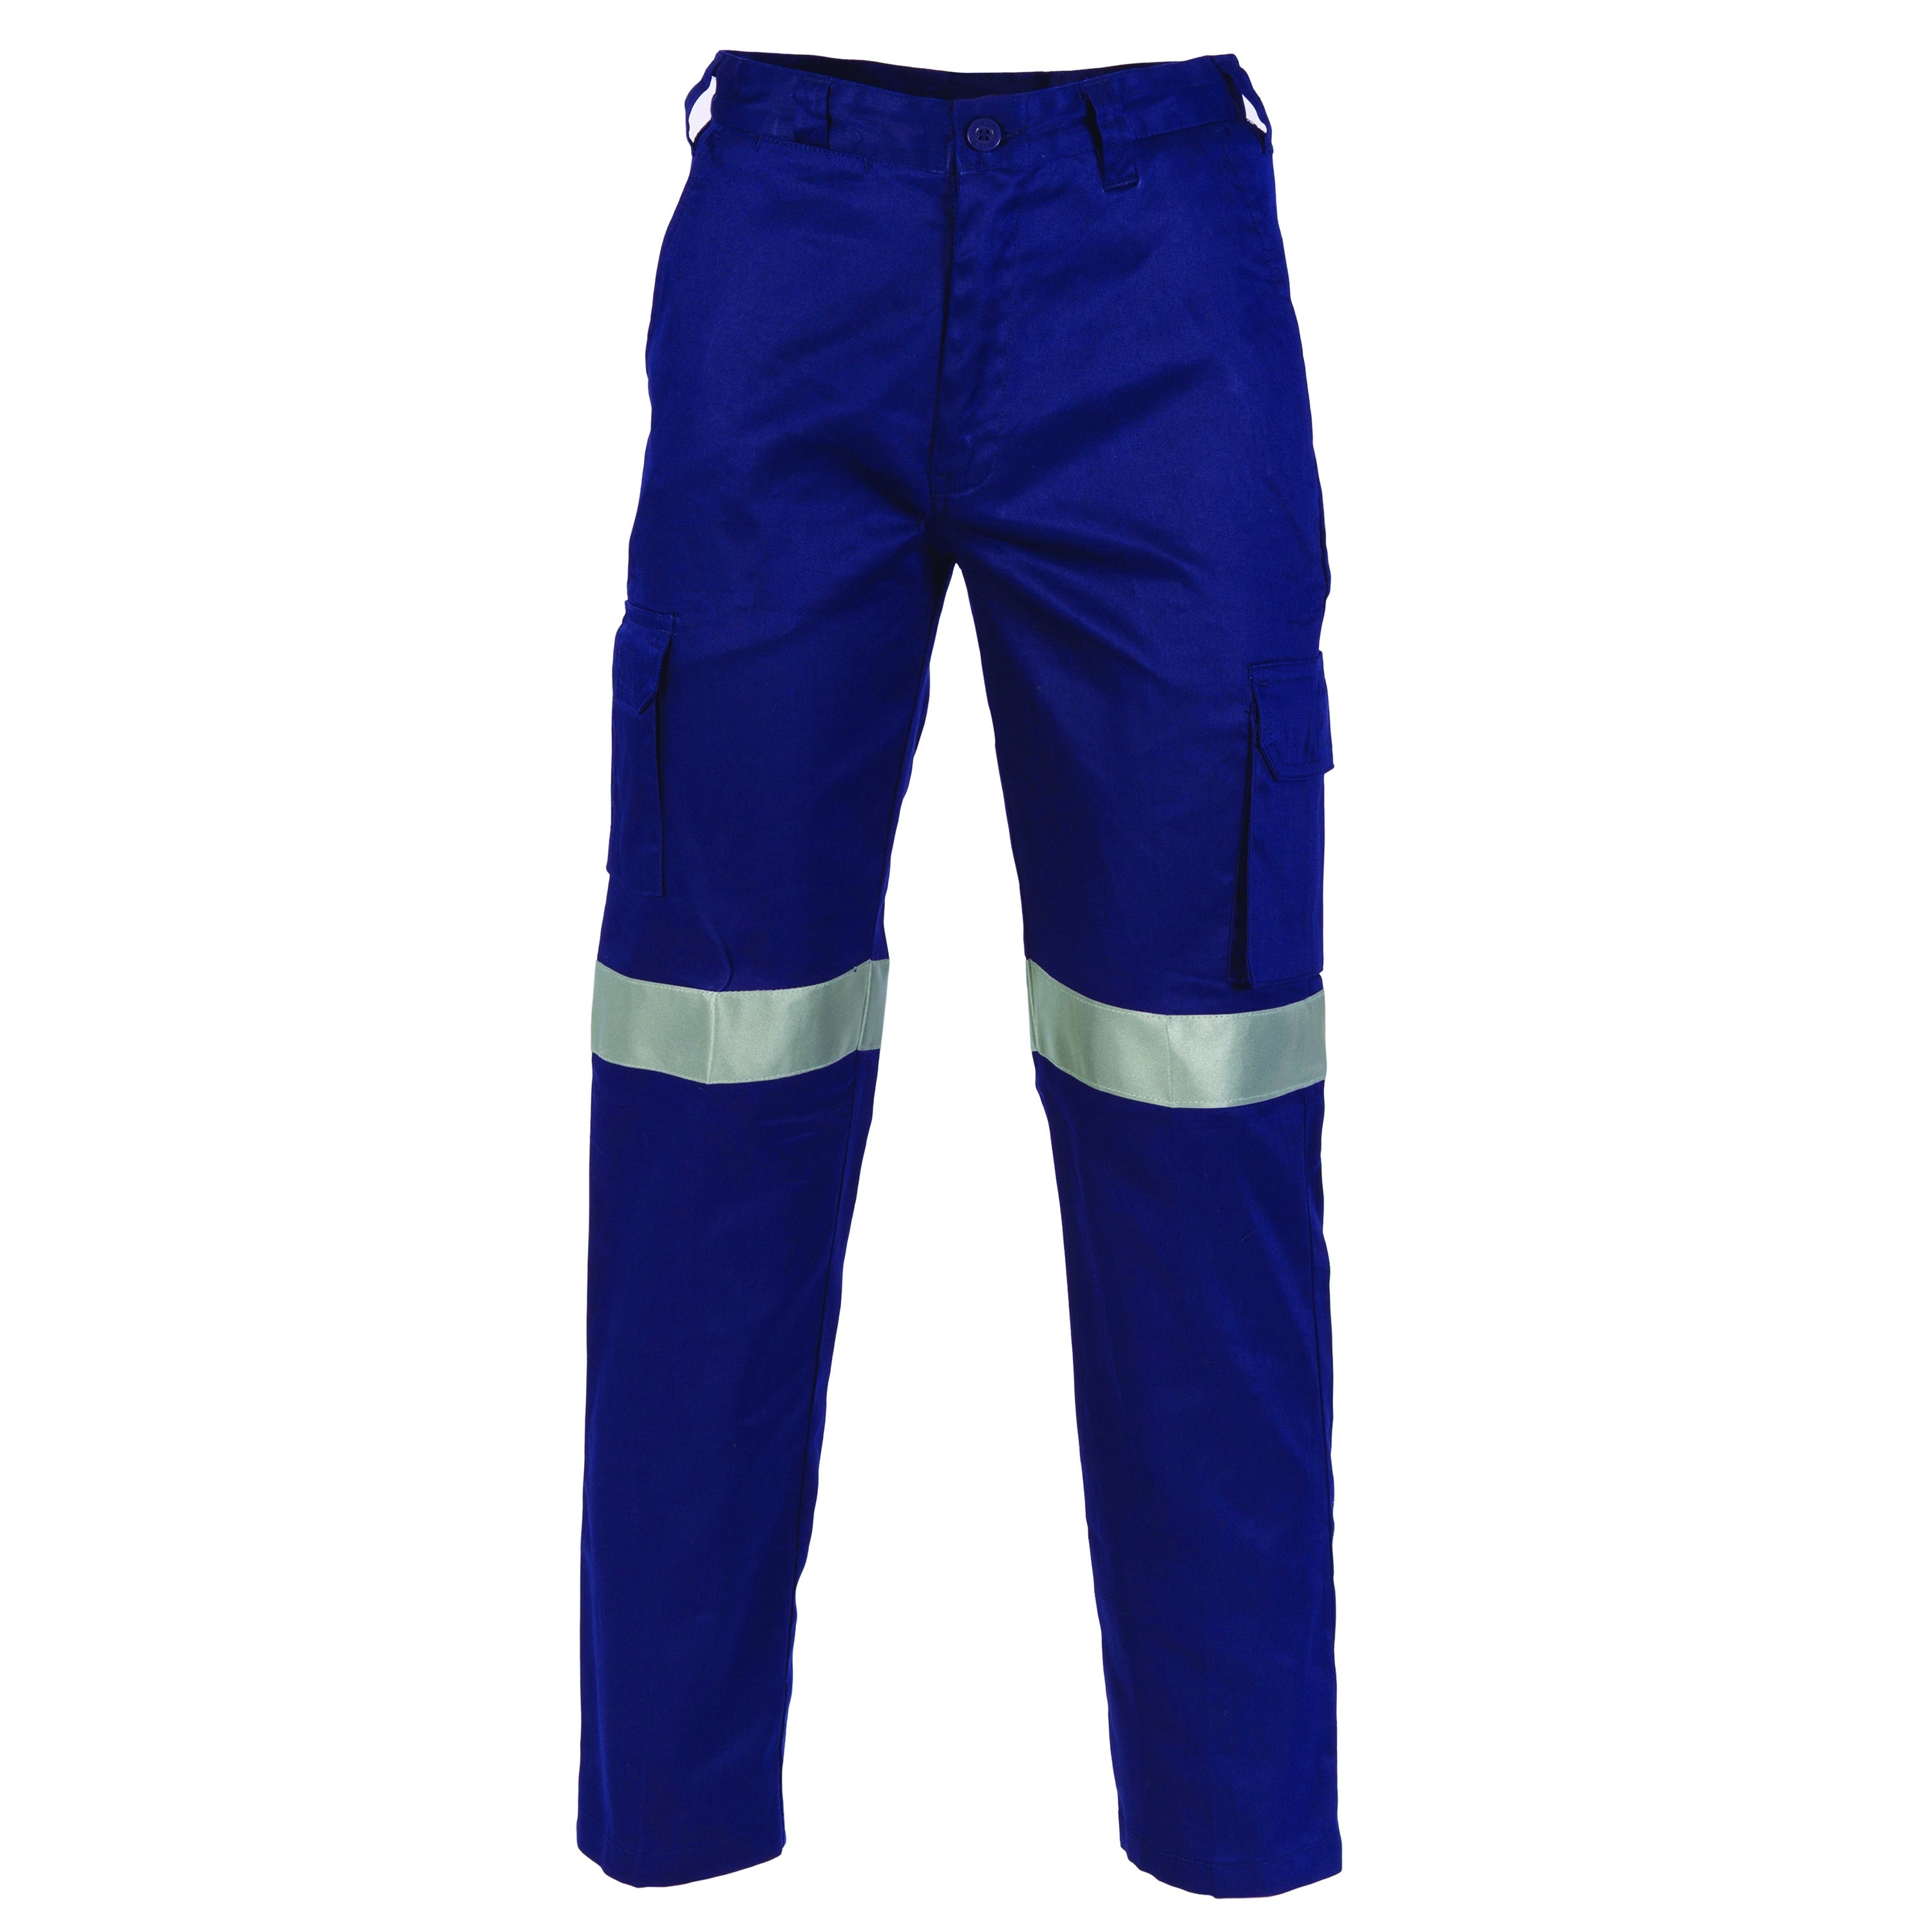 DNC 3326 Lightweight Cotton Cargo Pants with 3M Reflective Tape